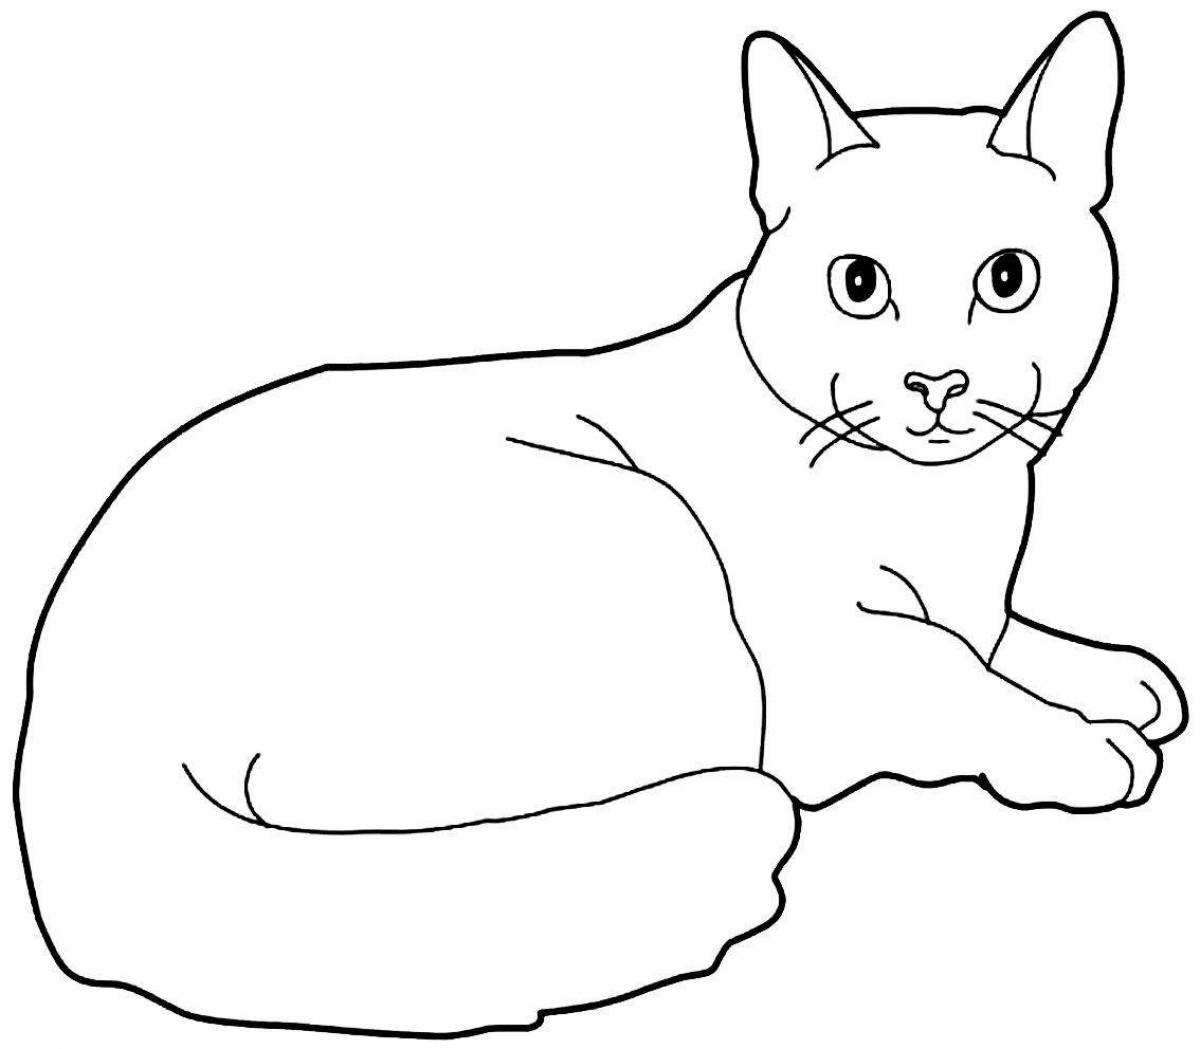 Coloring page mischievous sitting cat